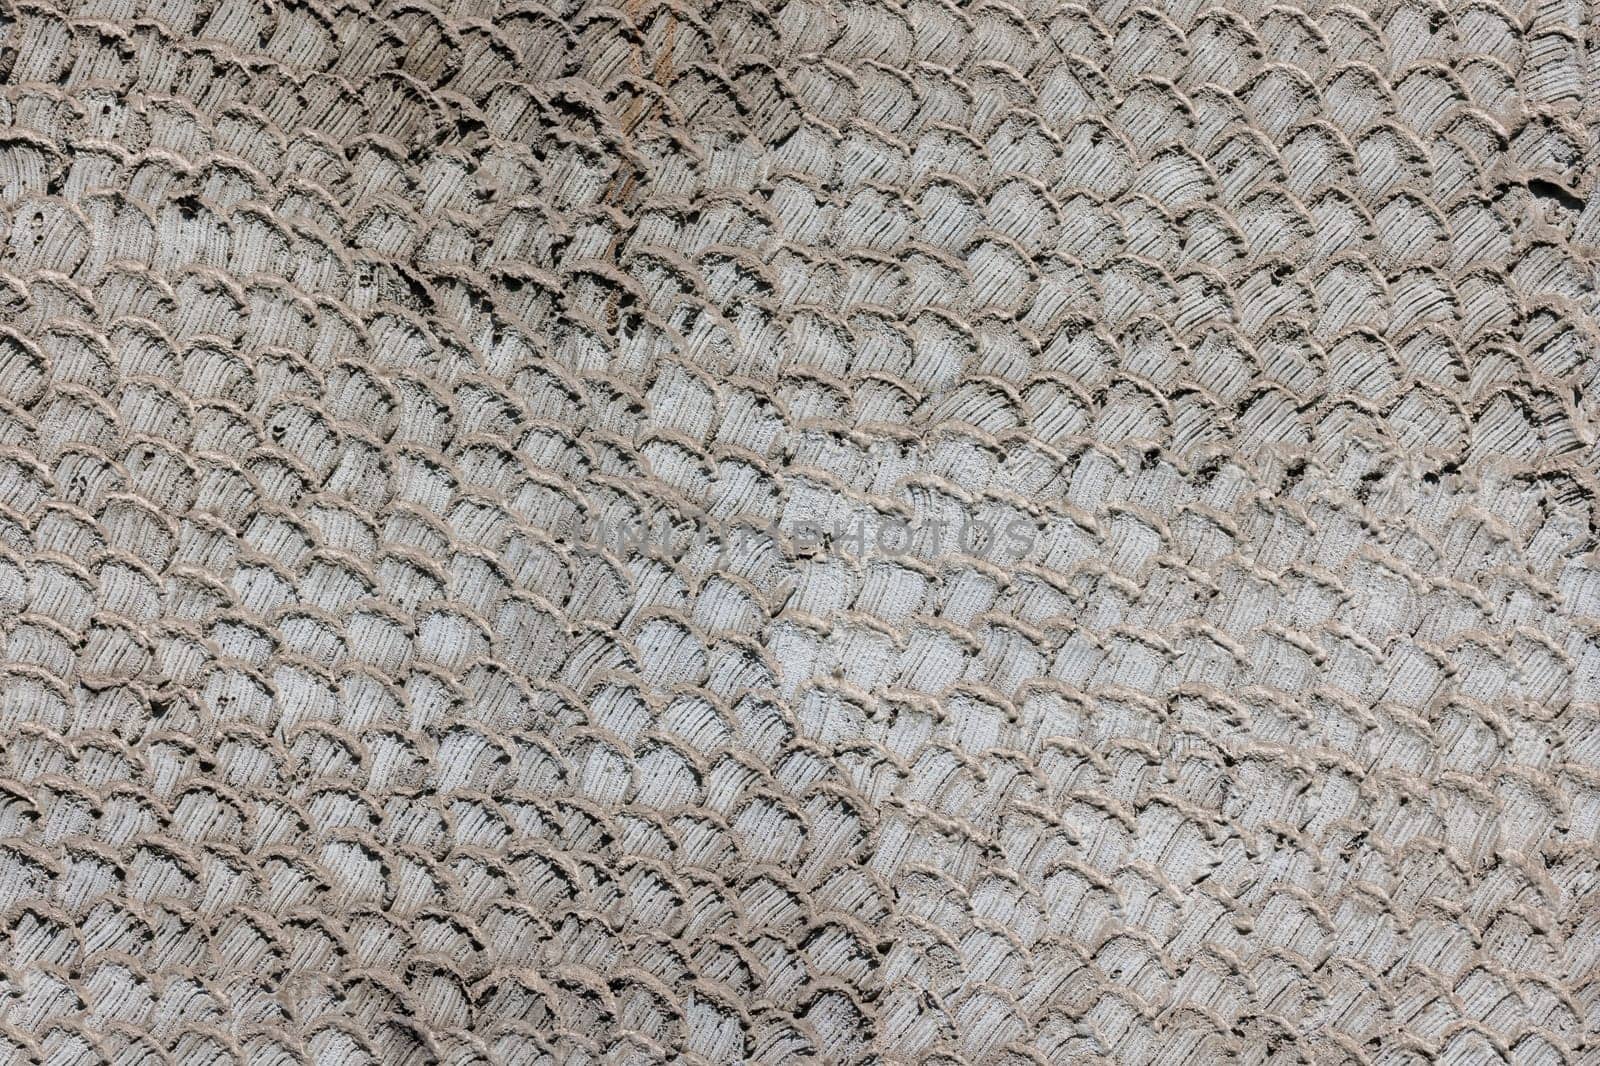 Texture of grey snakeskin or fish scale pattern finish on gray concrete wall, full-frame background.